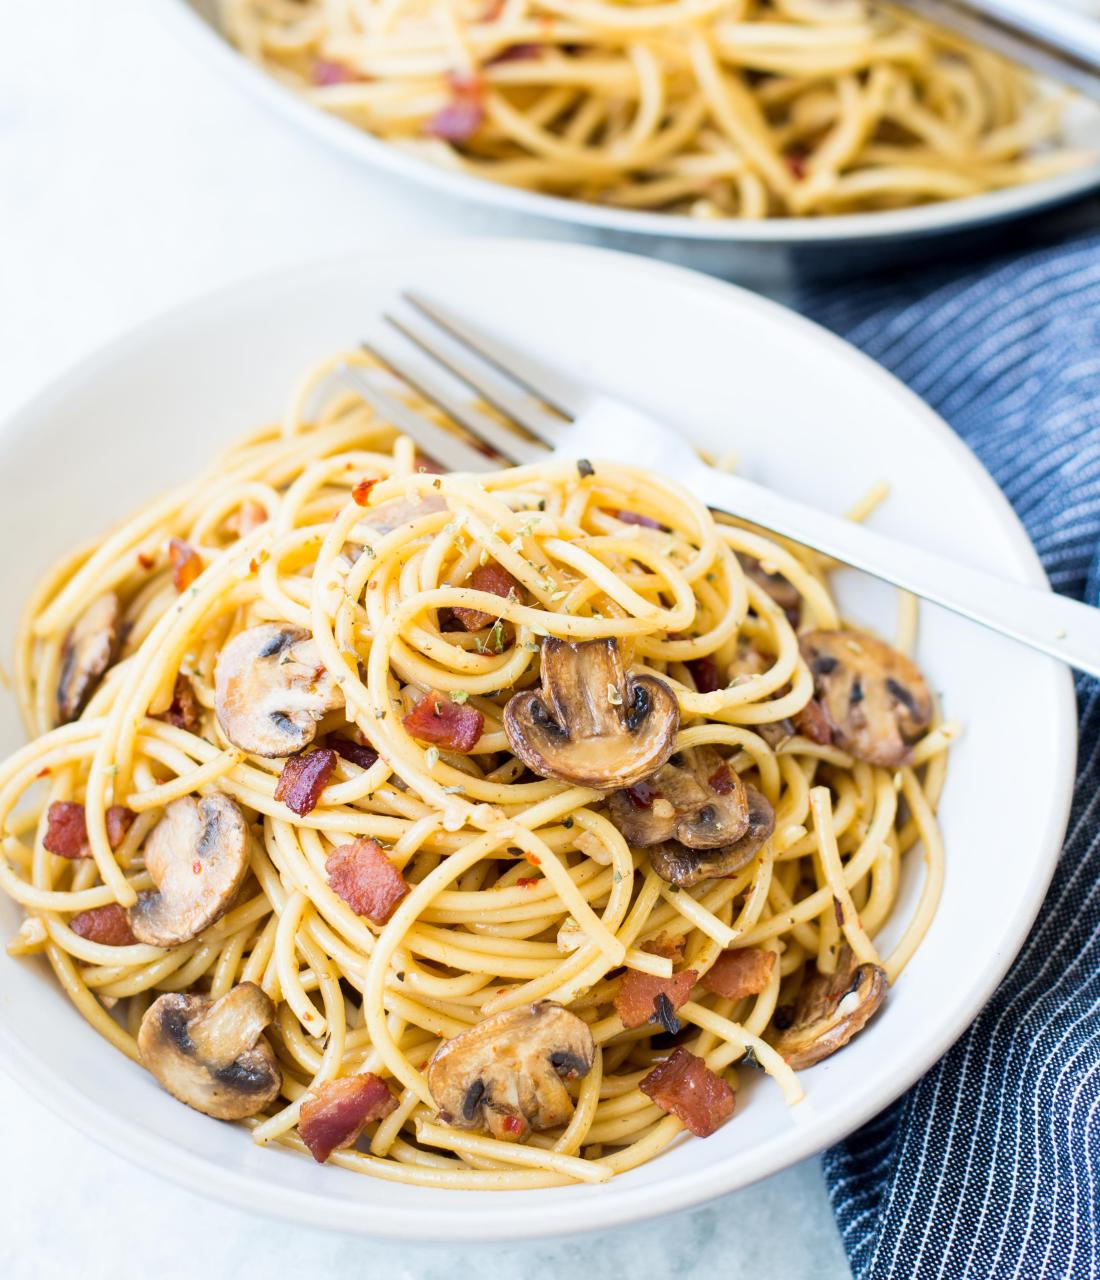 Garlic Mushroom Spaghetti With Bacon - The flavours of kitchen